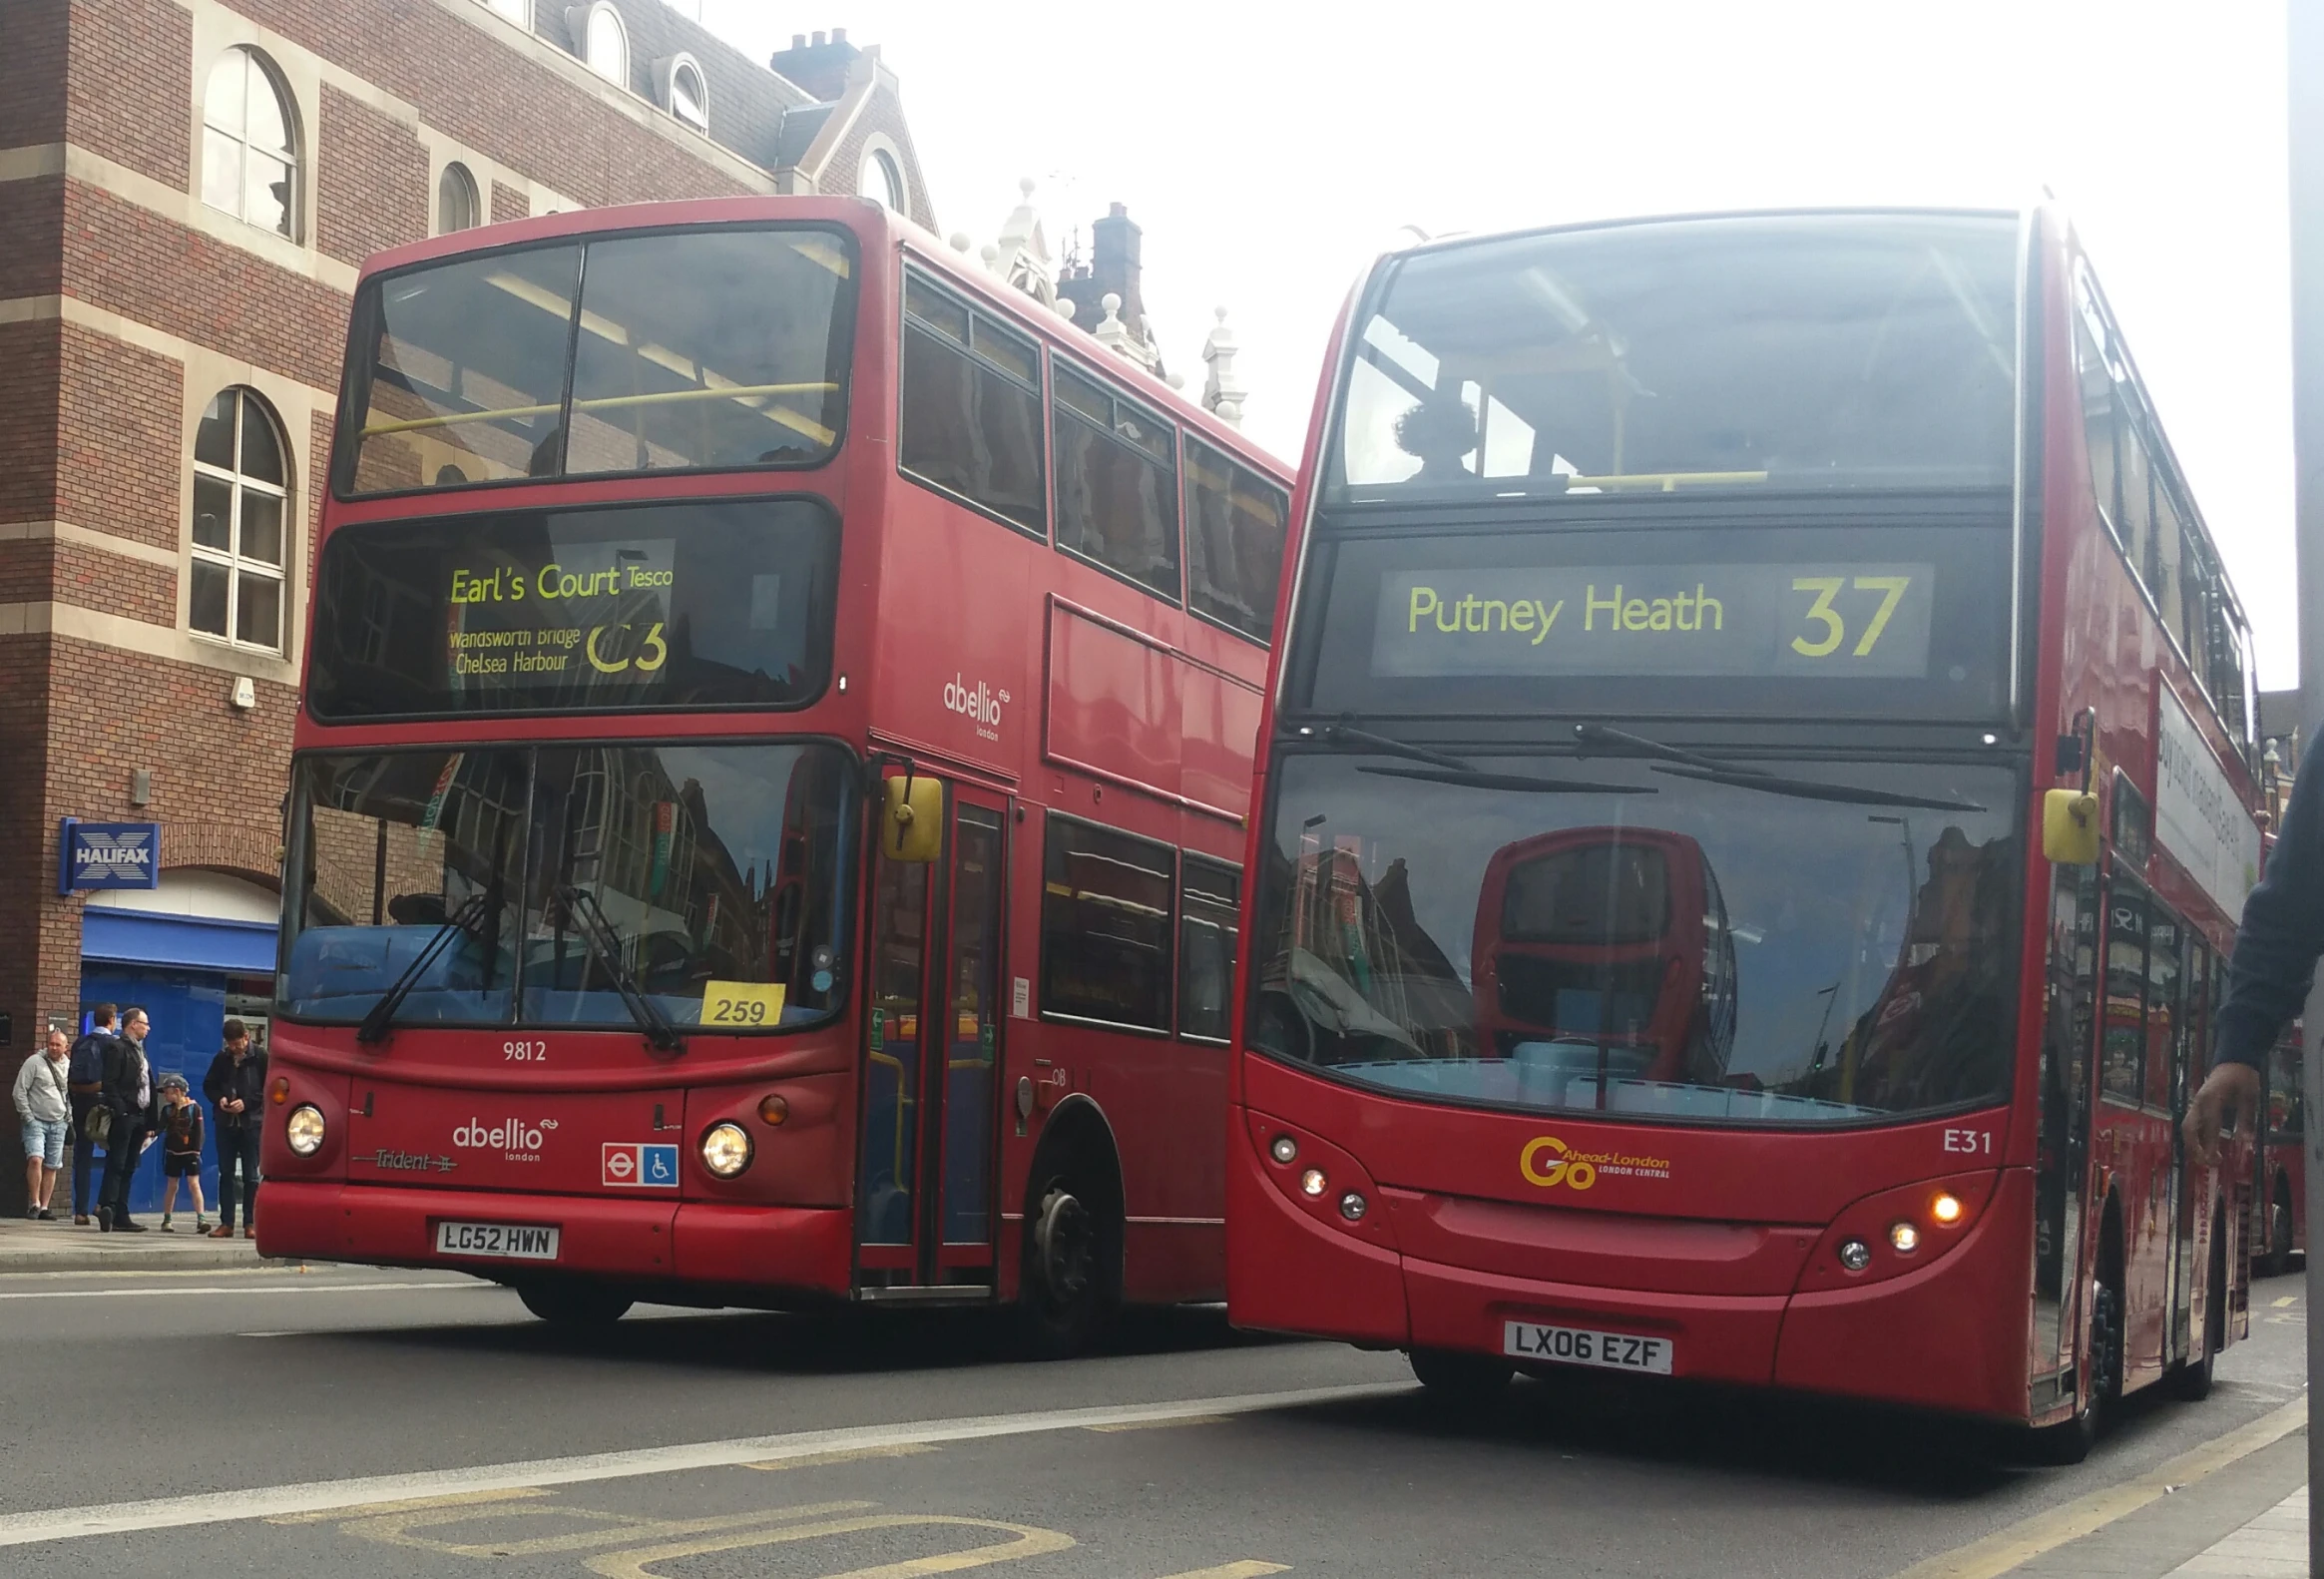 two double decker busses on street in front of brick buildings